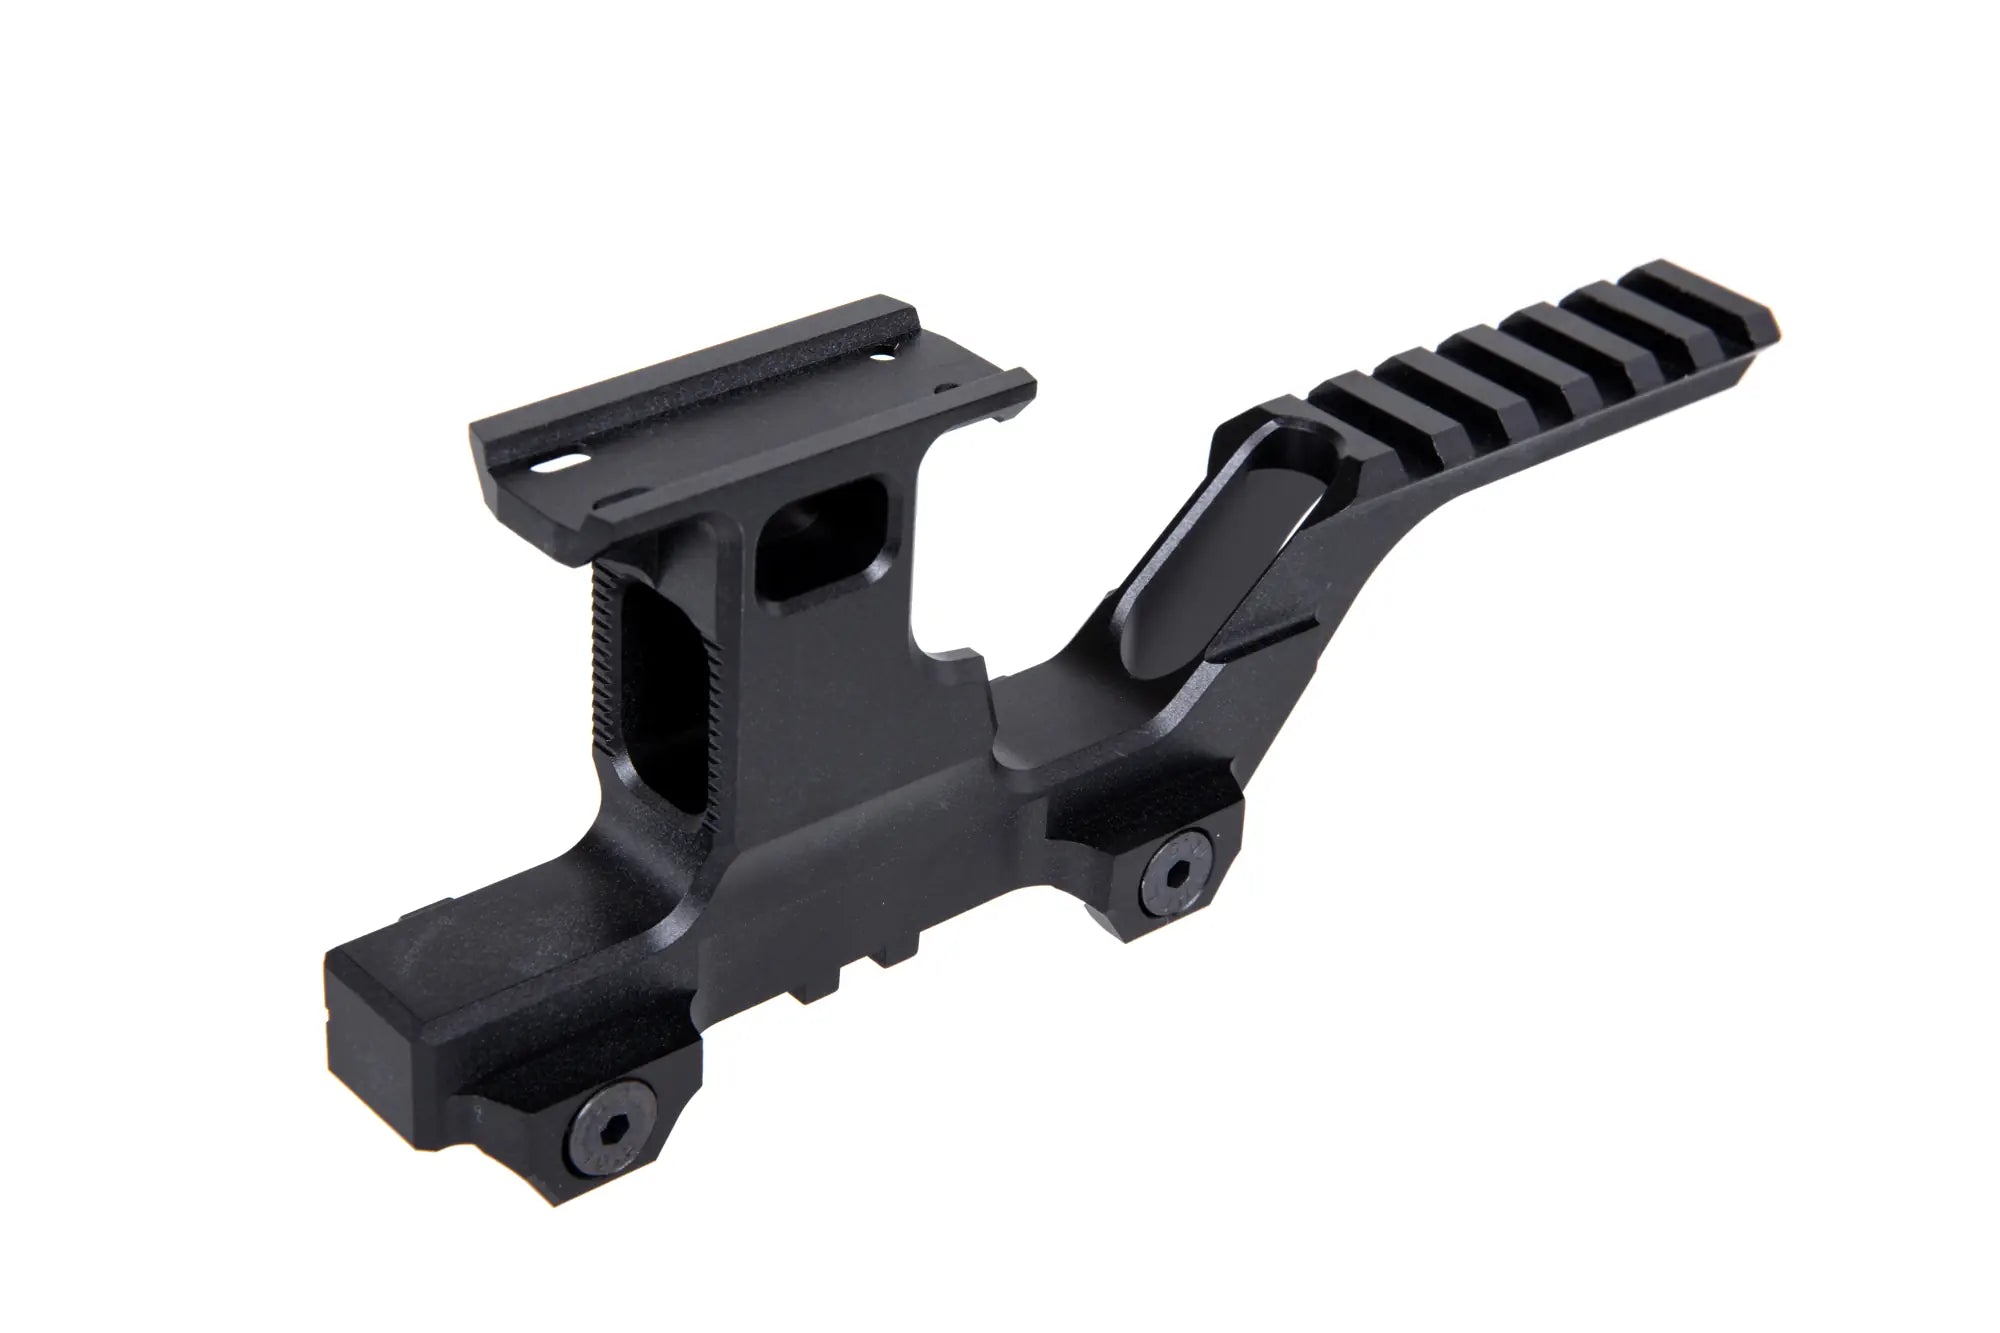 WADSN high mount for T1/T2 and PEQ collimators Black-1